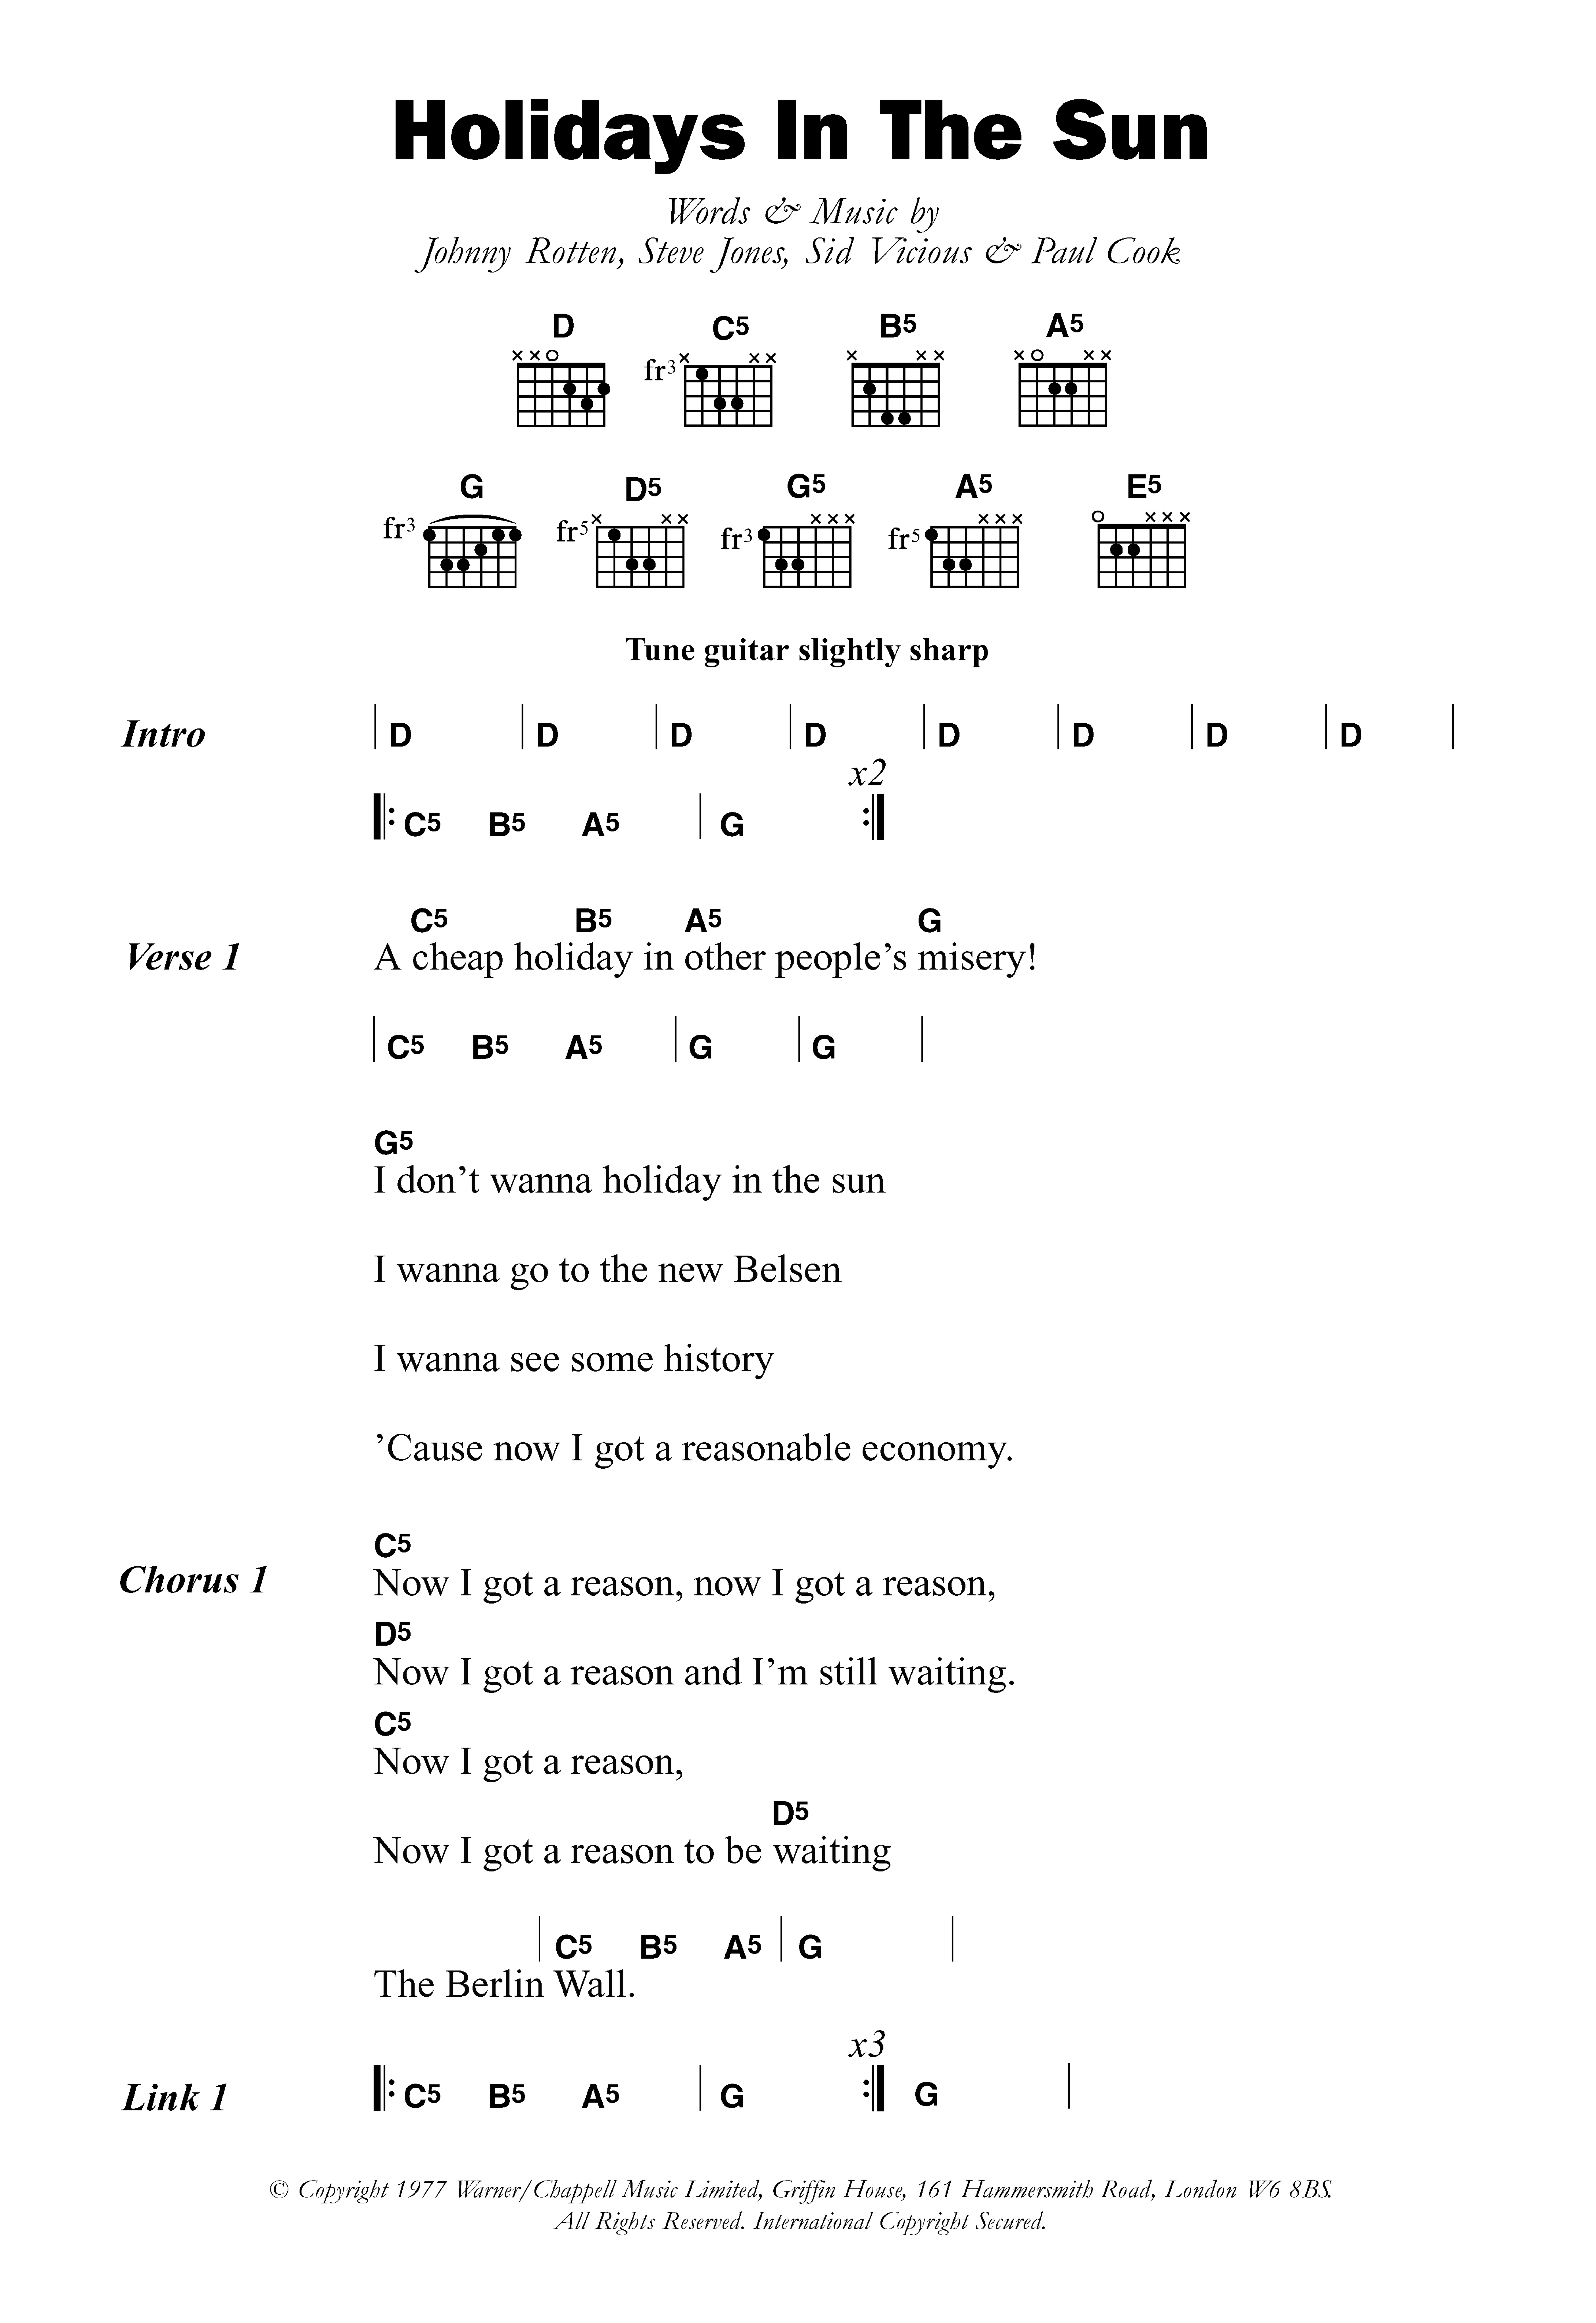 Download The Sex Pistols Holidays In The Sun Sheet Music